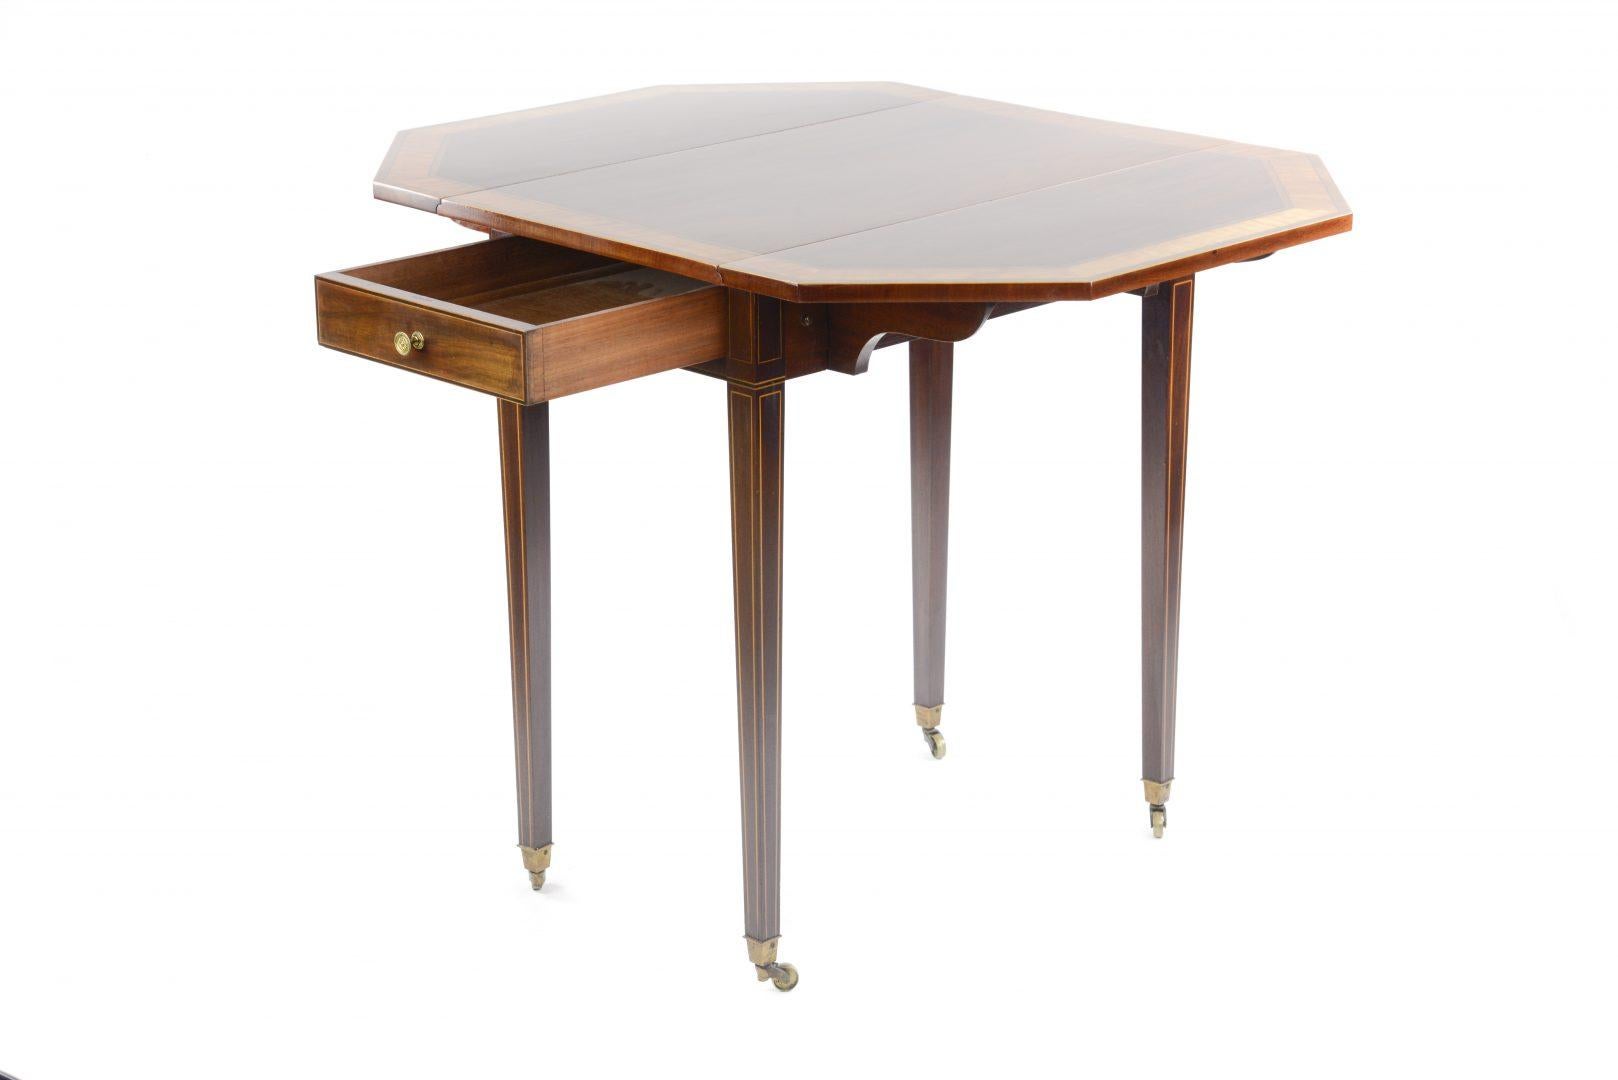 Victorian/Edwardian Sheraton style Pembroke table by Gillows Lancaster, crossbanded with satin, rosewood and ebony, single drawer with gilt brass knob, inlaid square taper legs with brass castors, the drawer stamped 'Gillows' & numbered 'L35946',